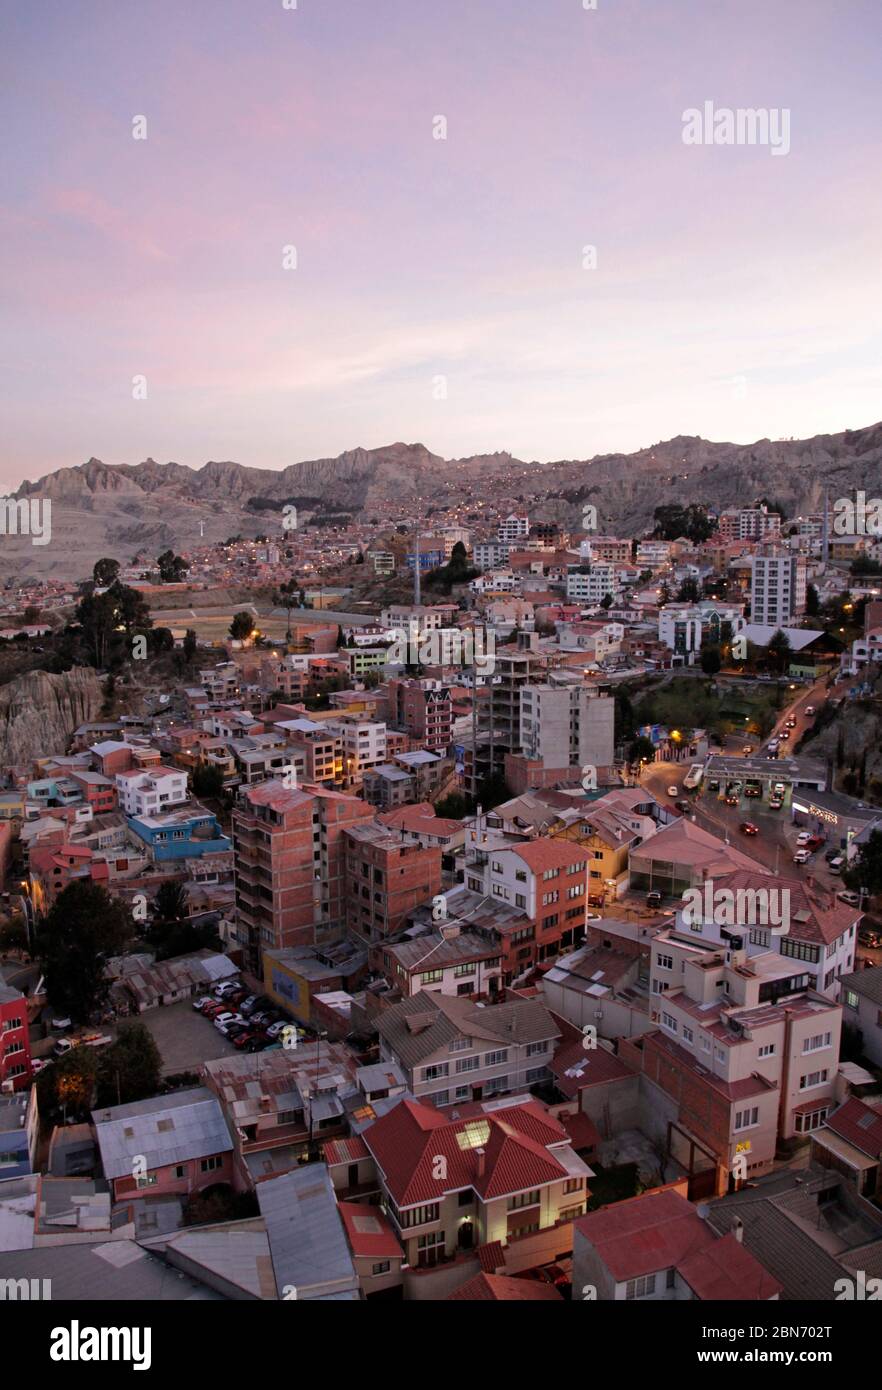 View over La Paz, Bolivia, in the evening hours Stock Photo